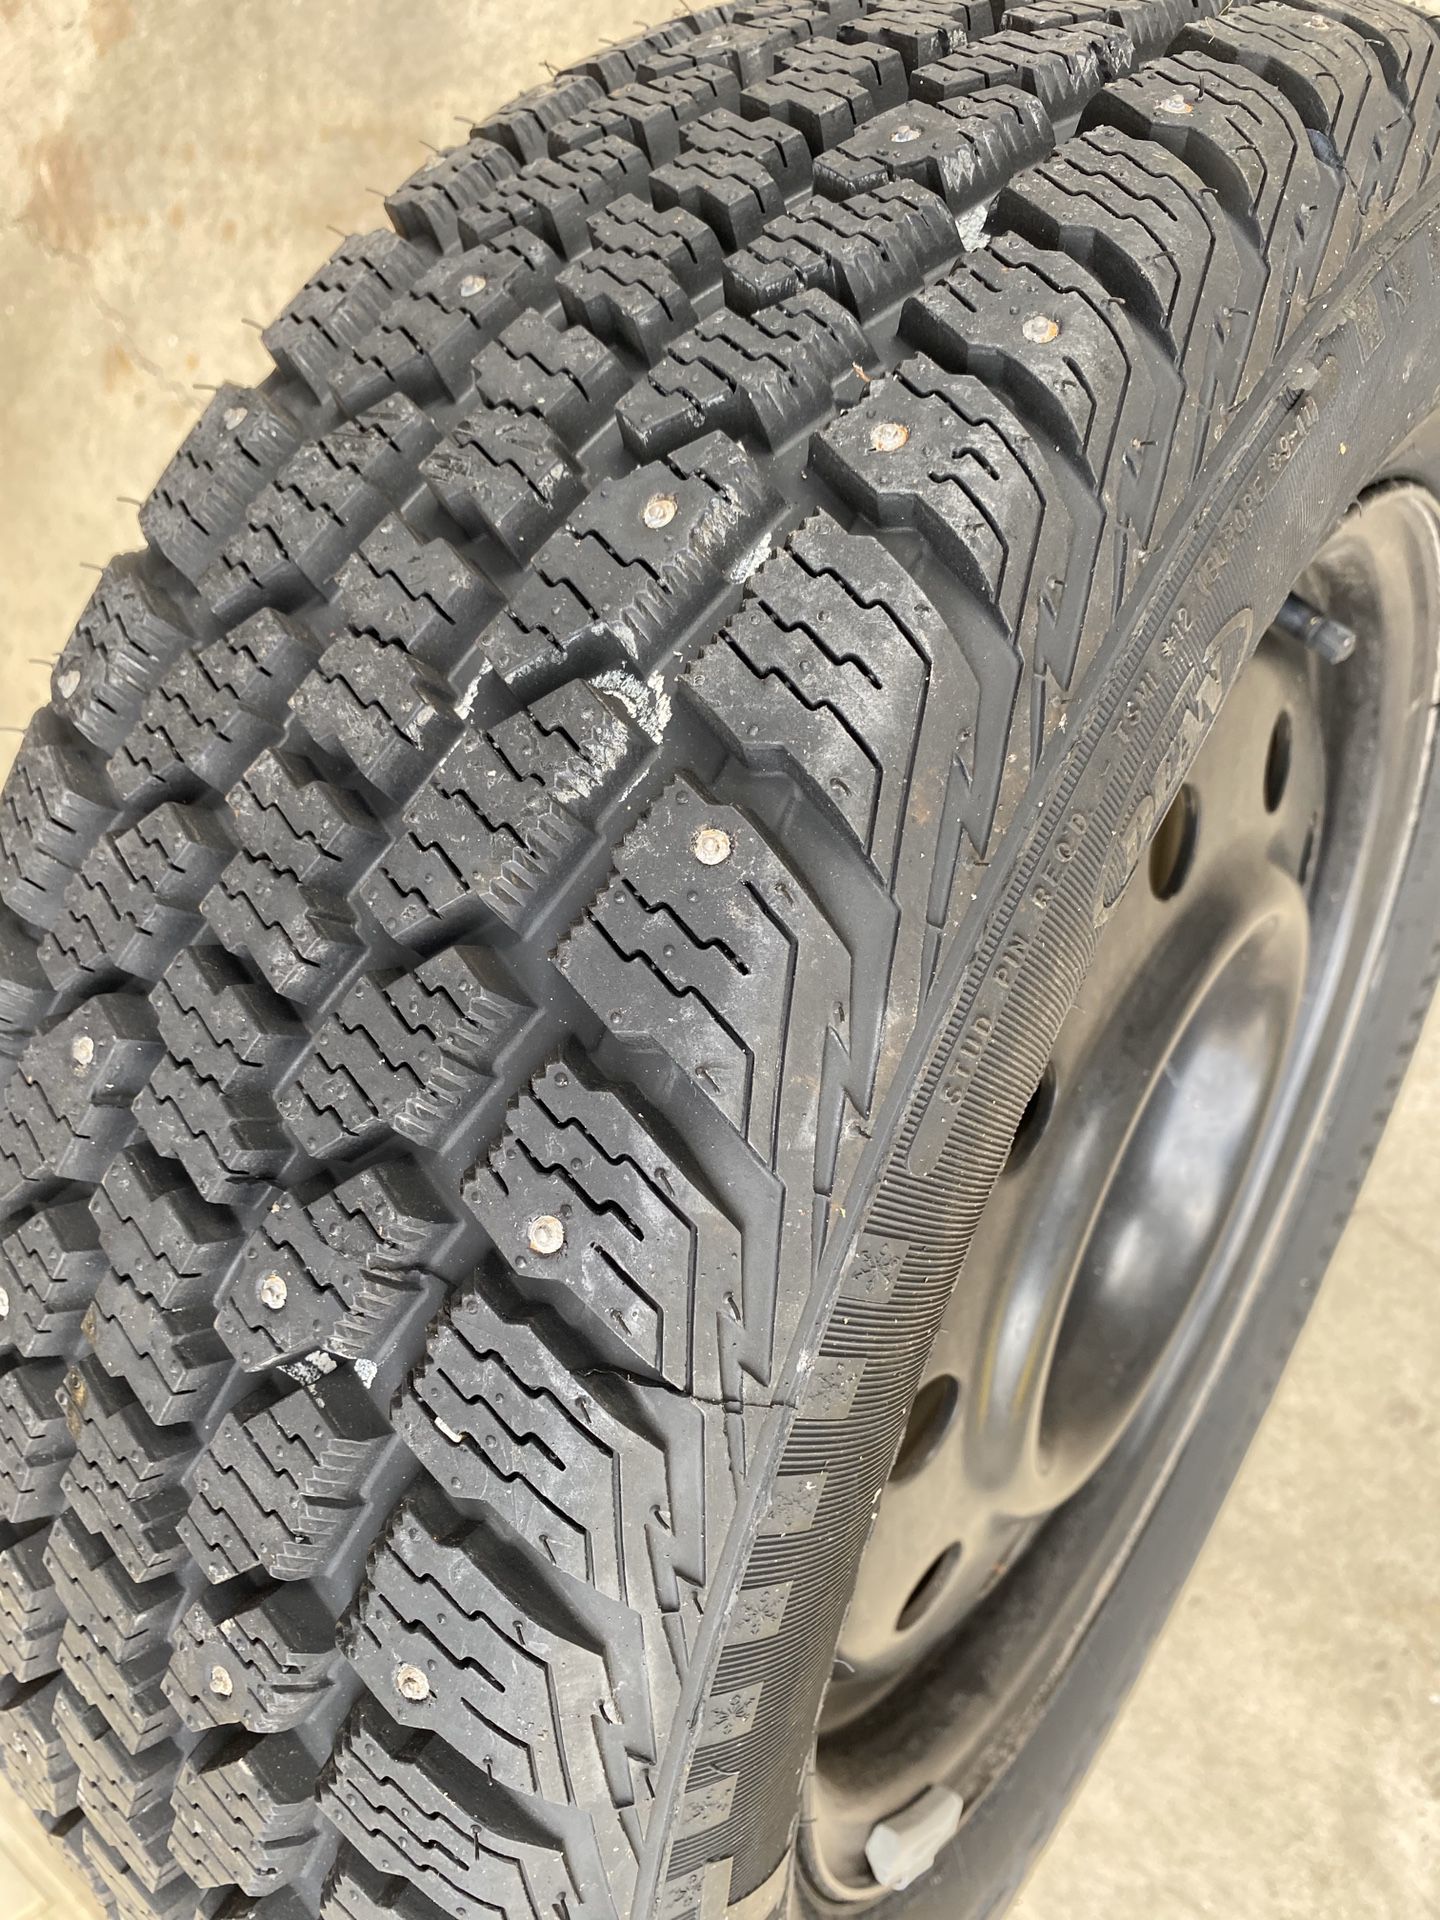 2 205/60/16 Brand new studded snow tires.